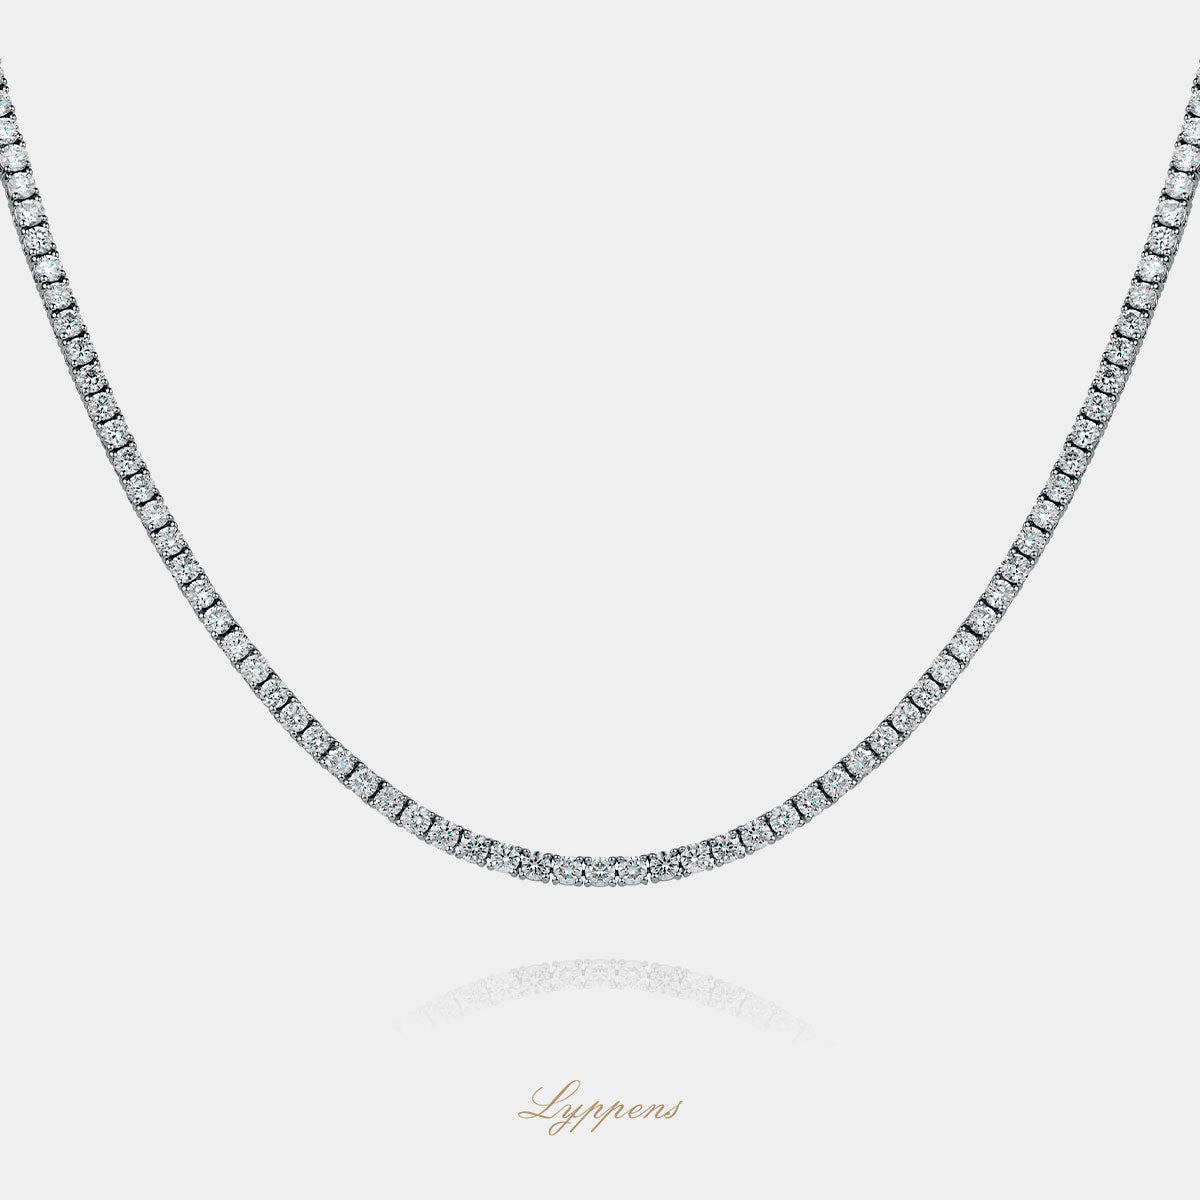 White gold tennis necklace with diamond 9.01ct